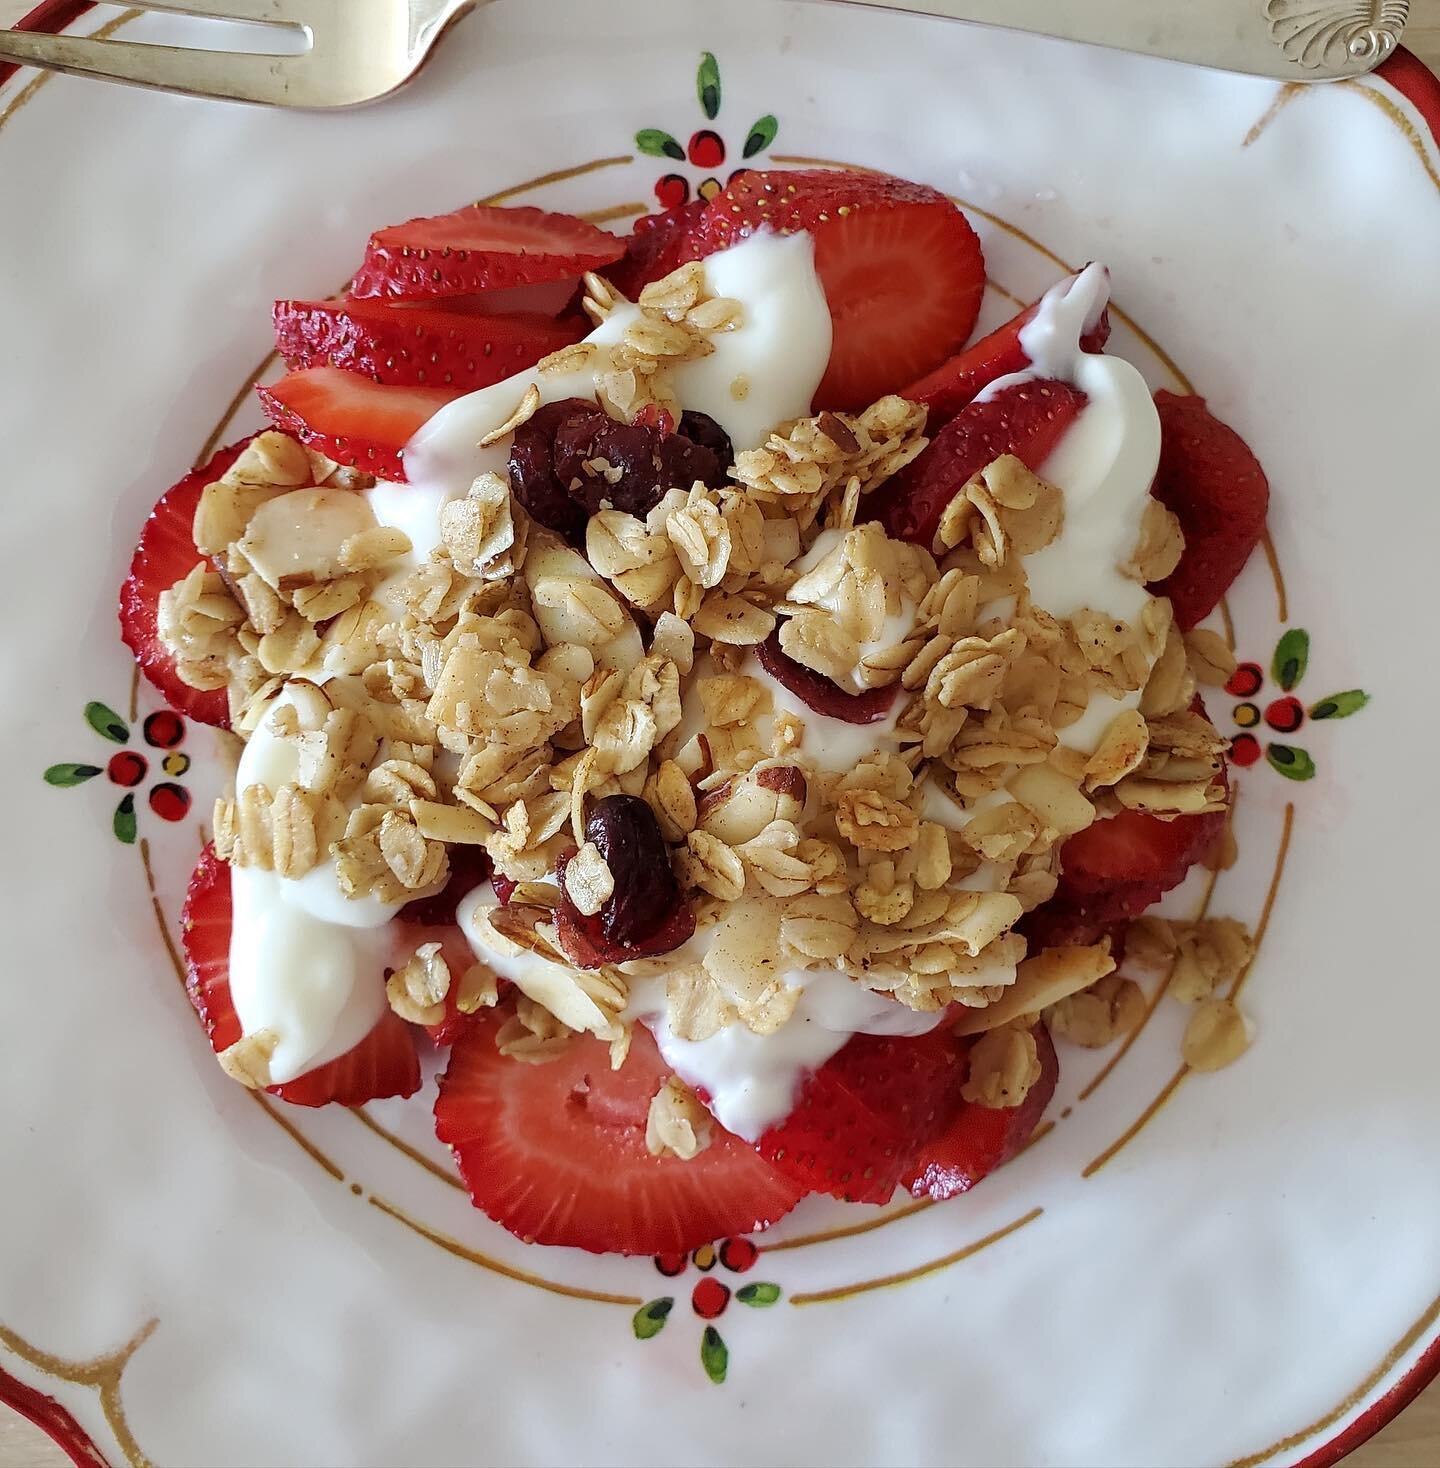 Happy Wednesday! One of our sweet customers in Maine sent us these beautiful breakfasts! The first one kept simple with our Cranberry Coconut granola atop yogurt with fresh strawberries. The second breakfast is Paris-inspired, served with a chocolate